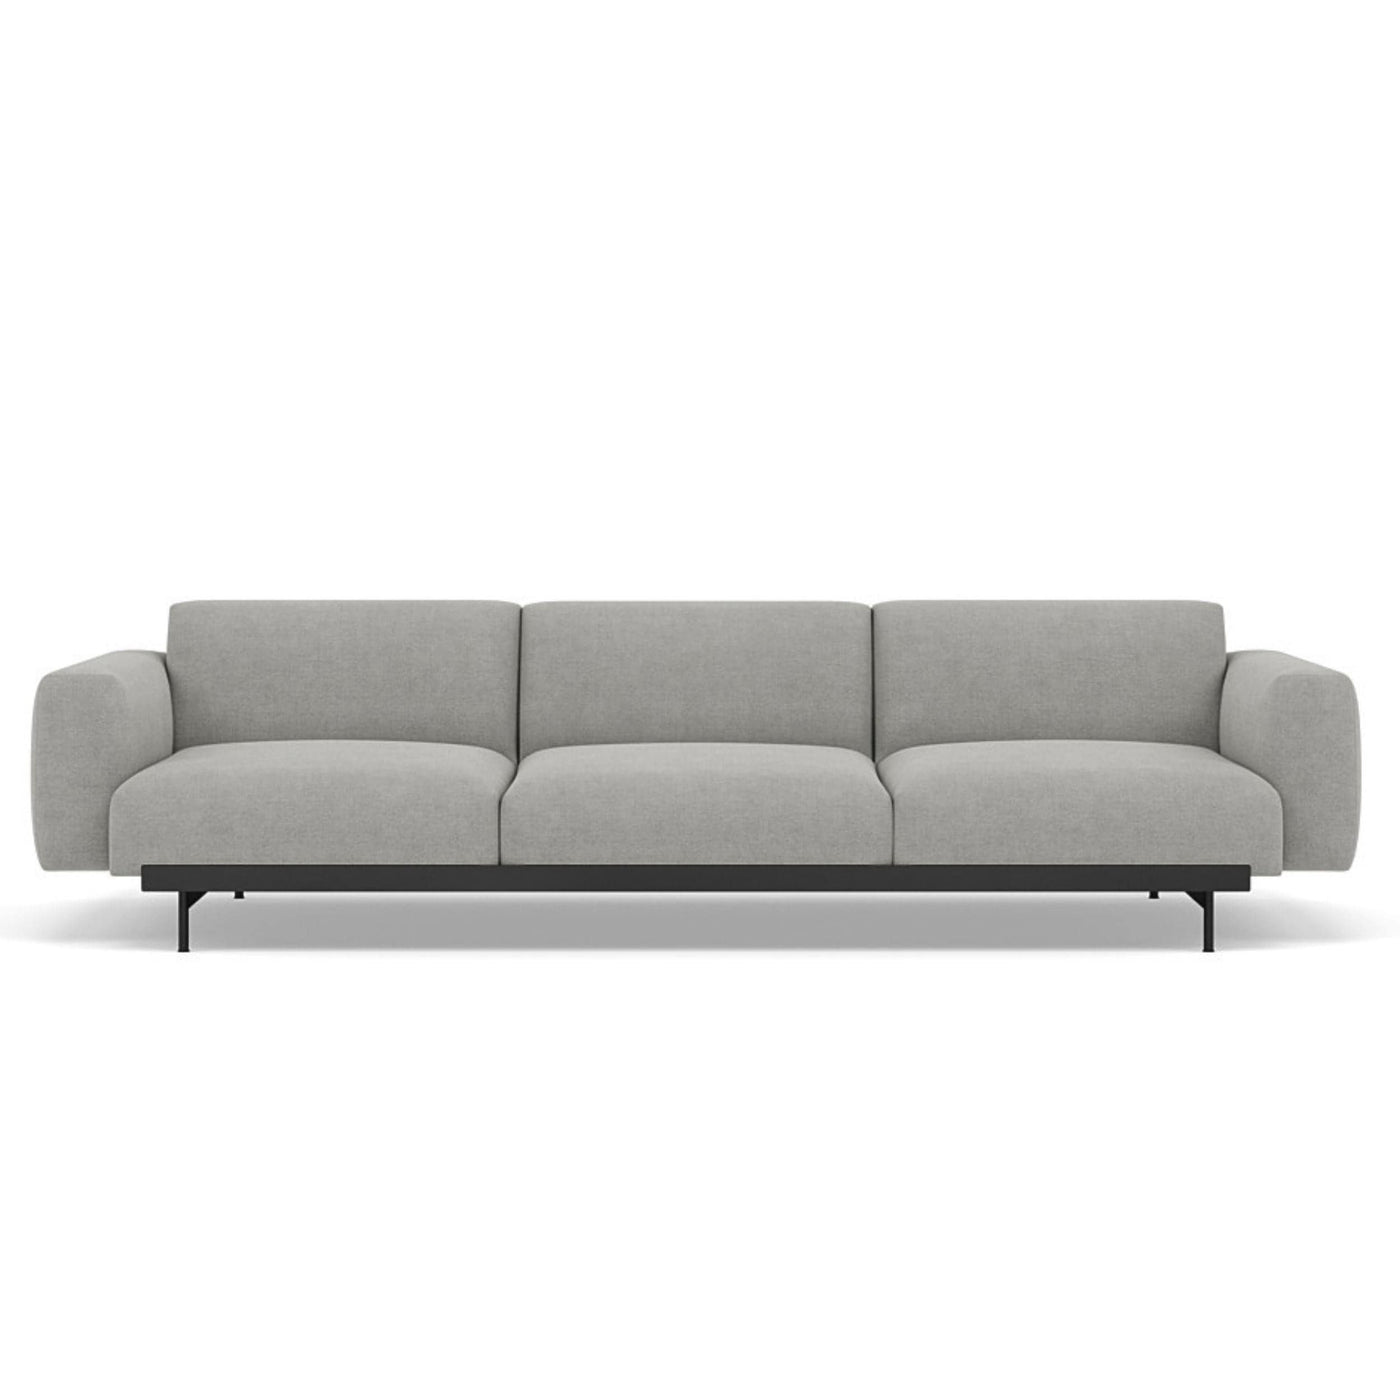 Muuto In Situ Modular 3 Seater Sofa, configuration 1. Made to order from someday designs. #colour_fiord-151